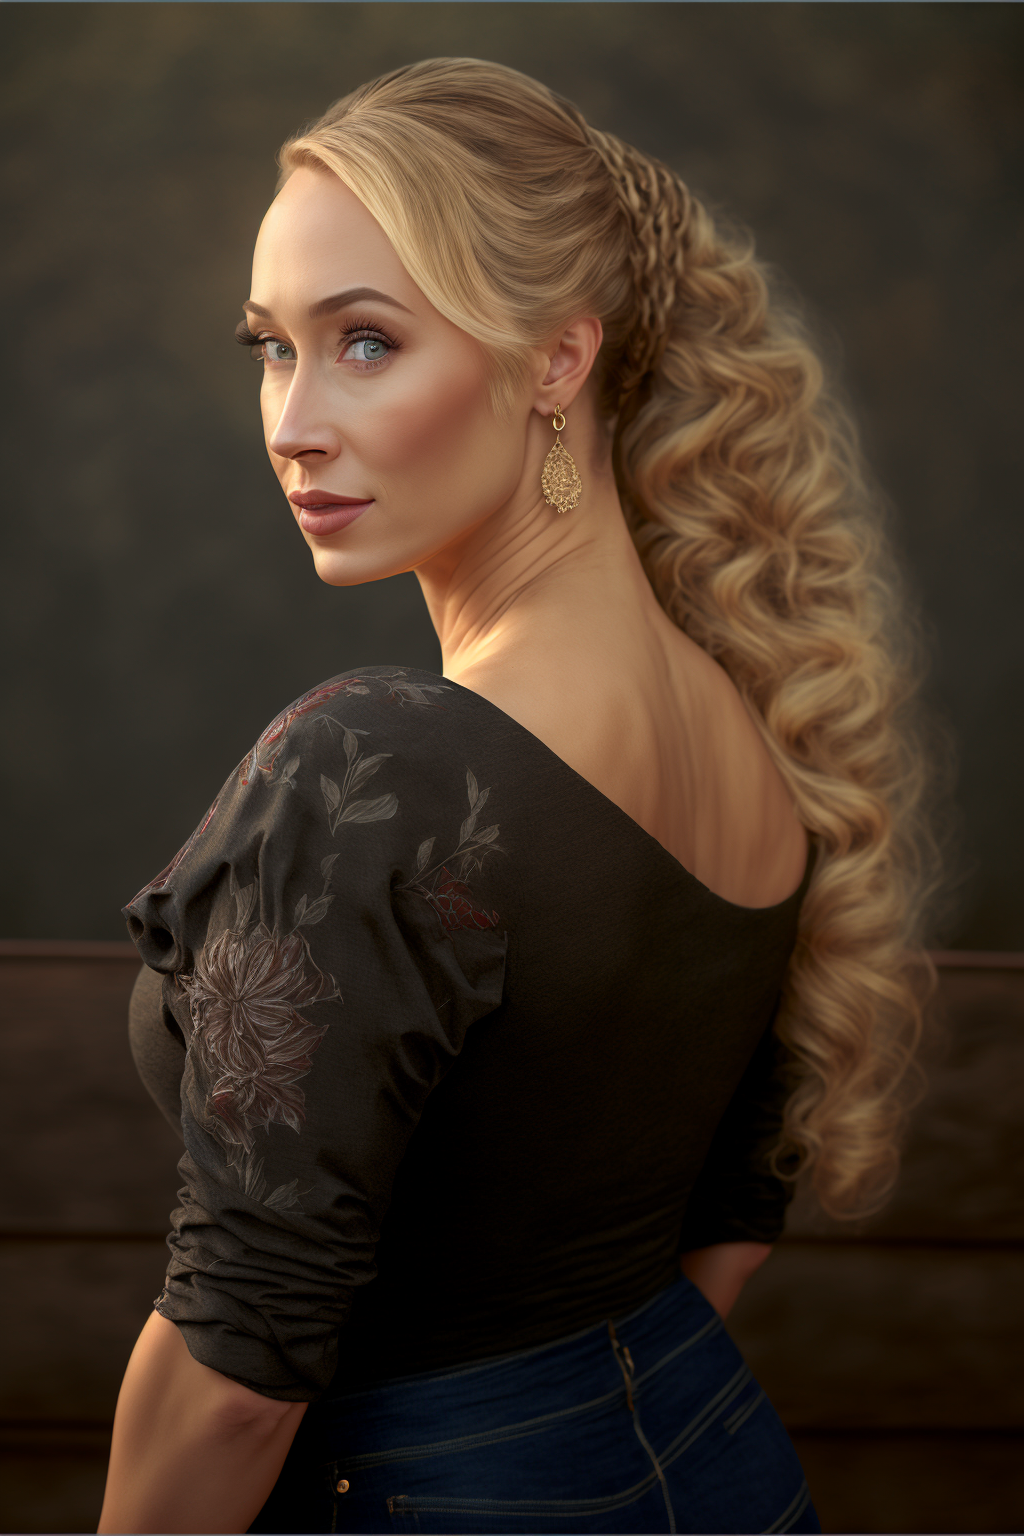 danhowl_beautiful_blonde_woman_looking_over_her_shoulder_as_Ren_fad35404-5b55-4f0a-875f-afd27dcb5e88